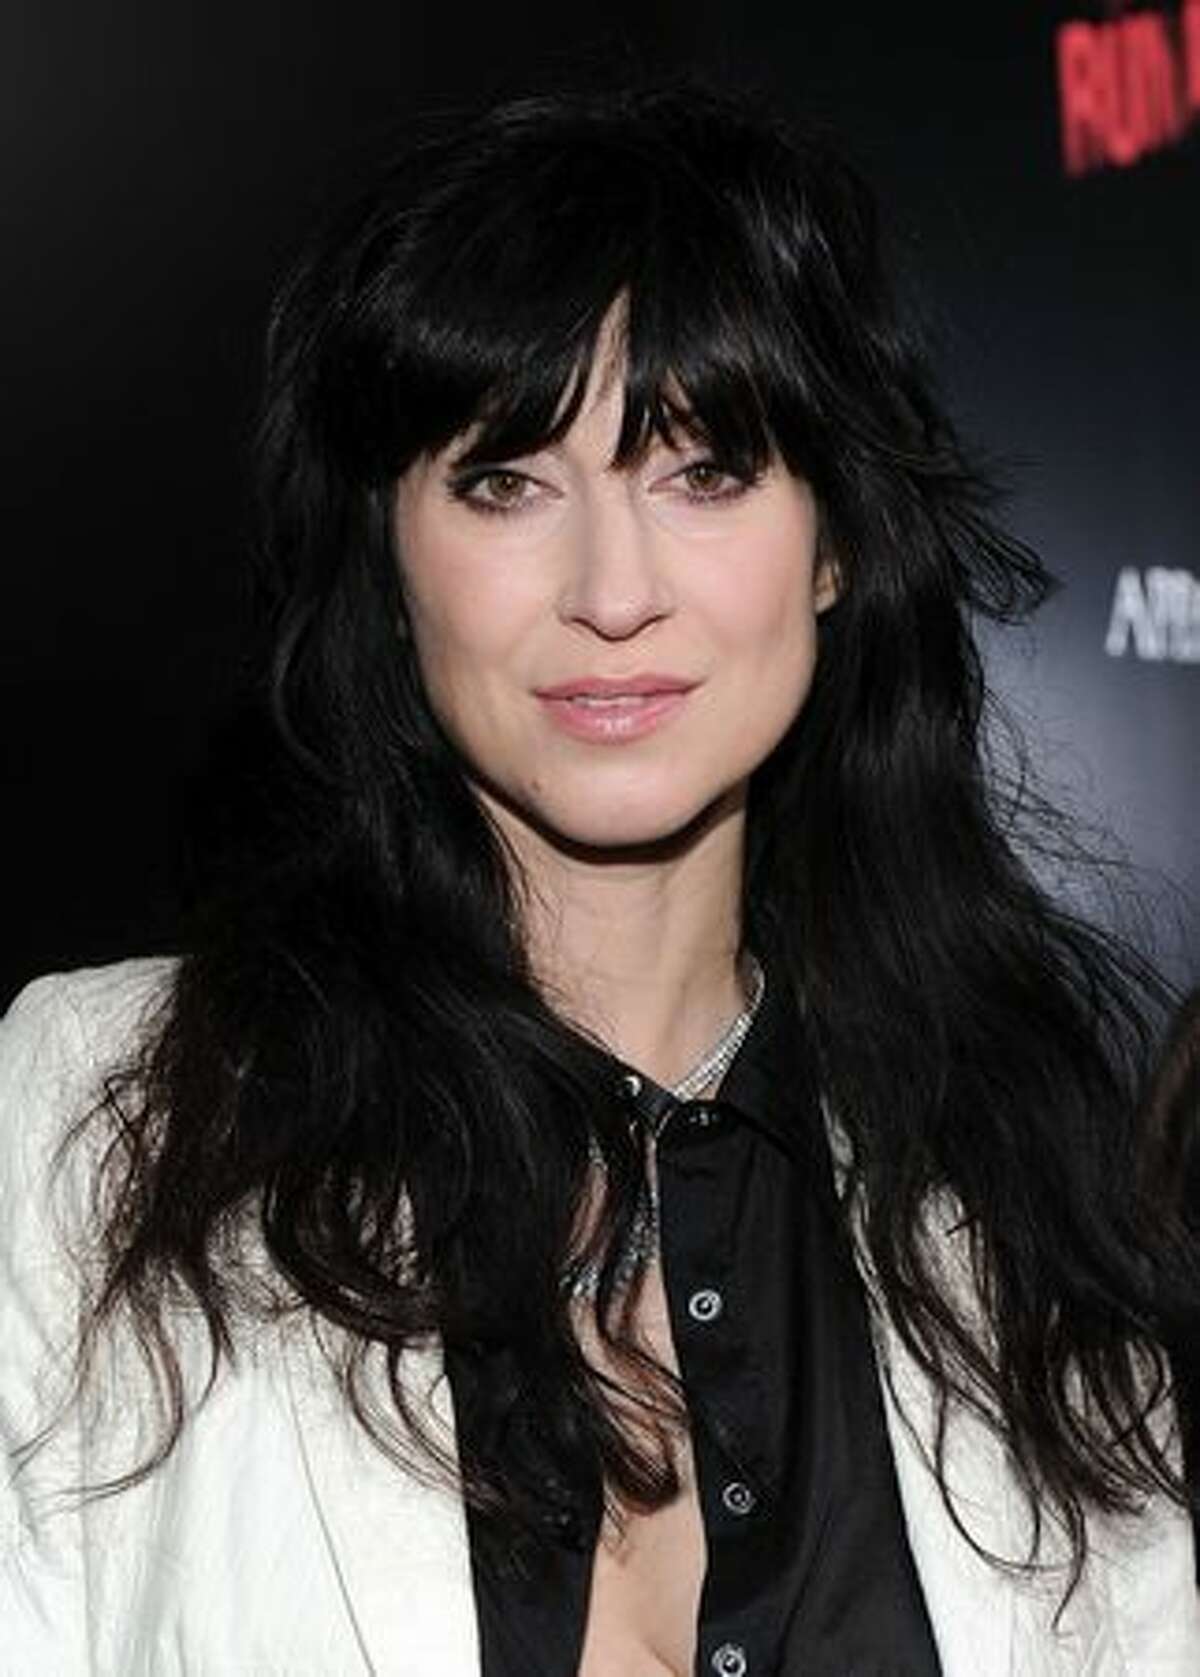 Director Floria Sigismondi arrives at the premiere of Apparition's "The Runaways" held at ArcLight Cinemas Cinerama Dome in Los Angeles, California.